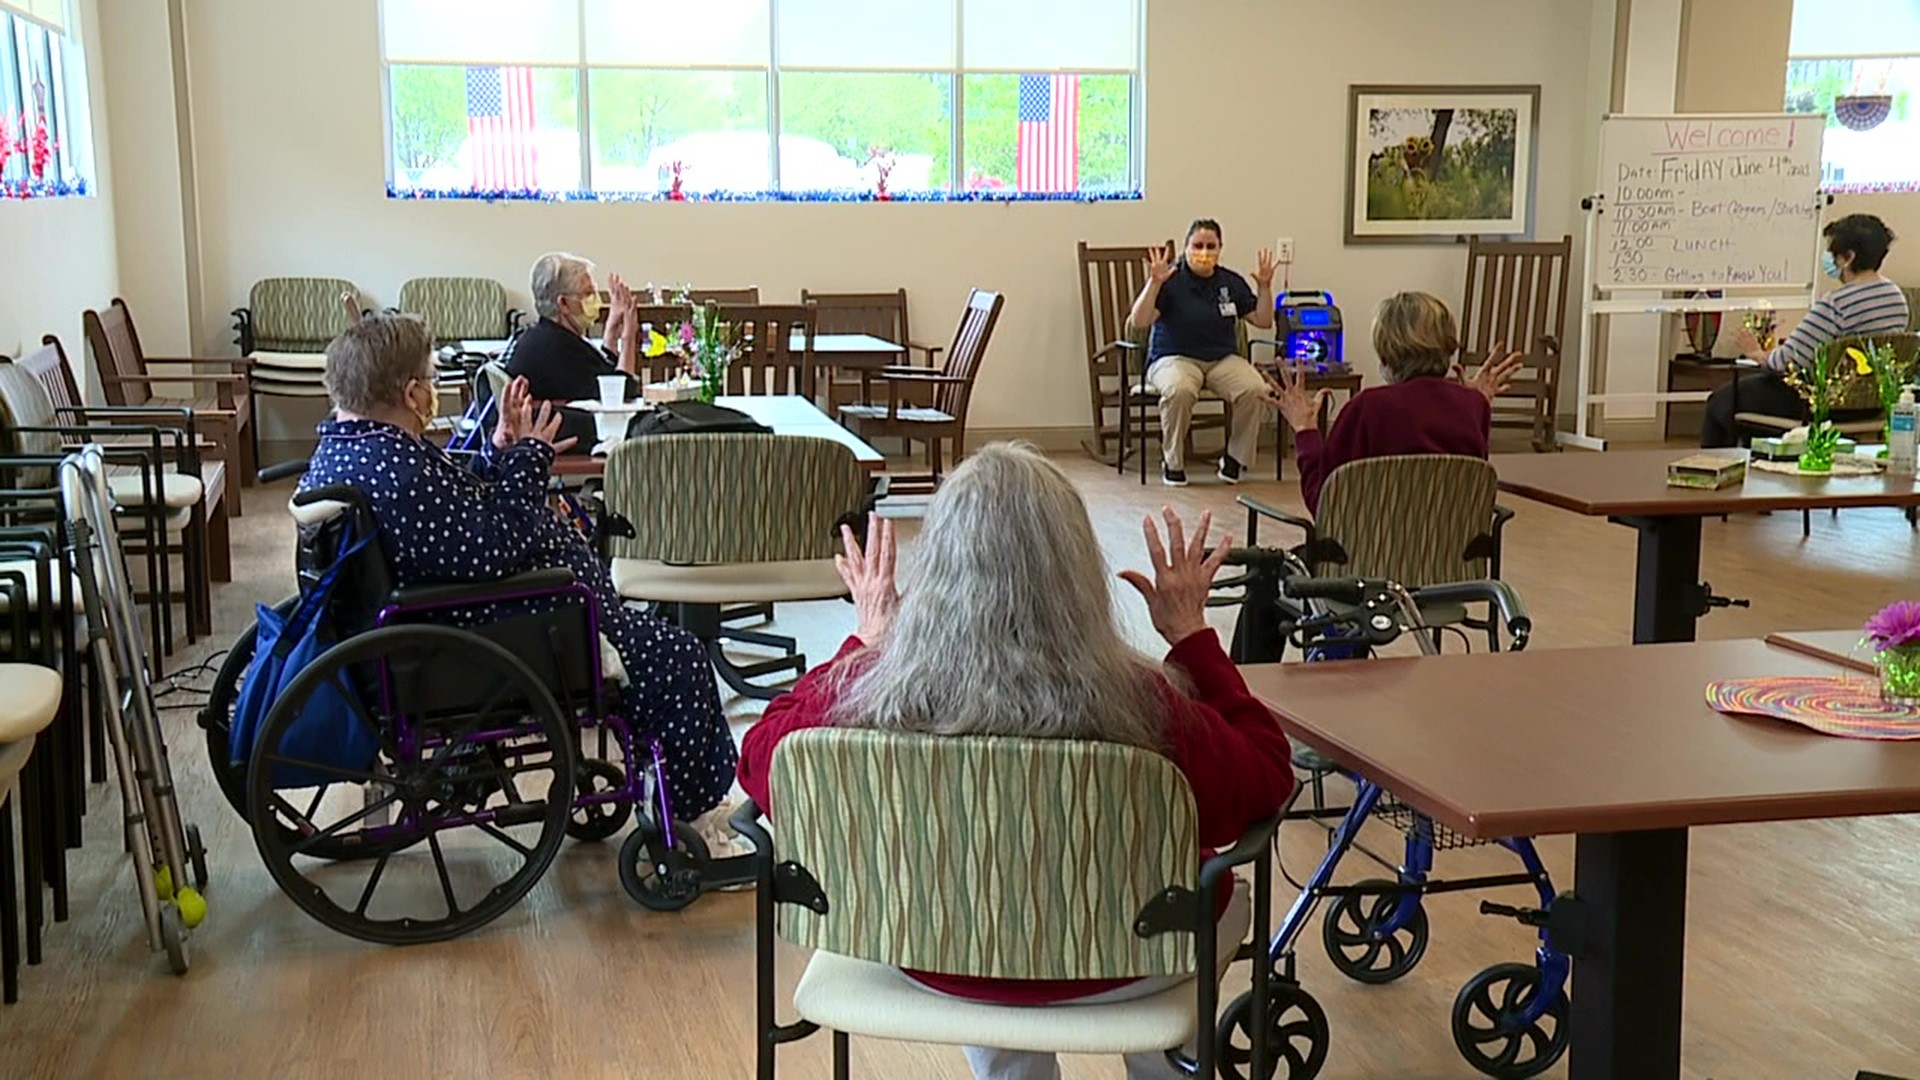 In Luzerne County, a new LIFE Geisinger facility opened last week that will allow staff there to serve a lot more clients.